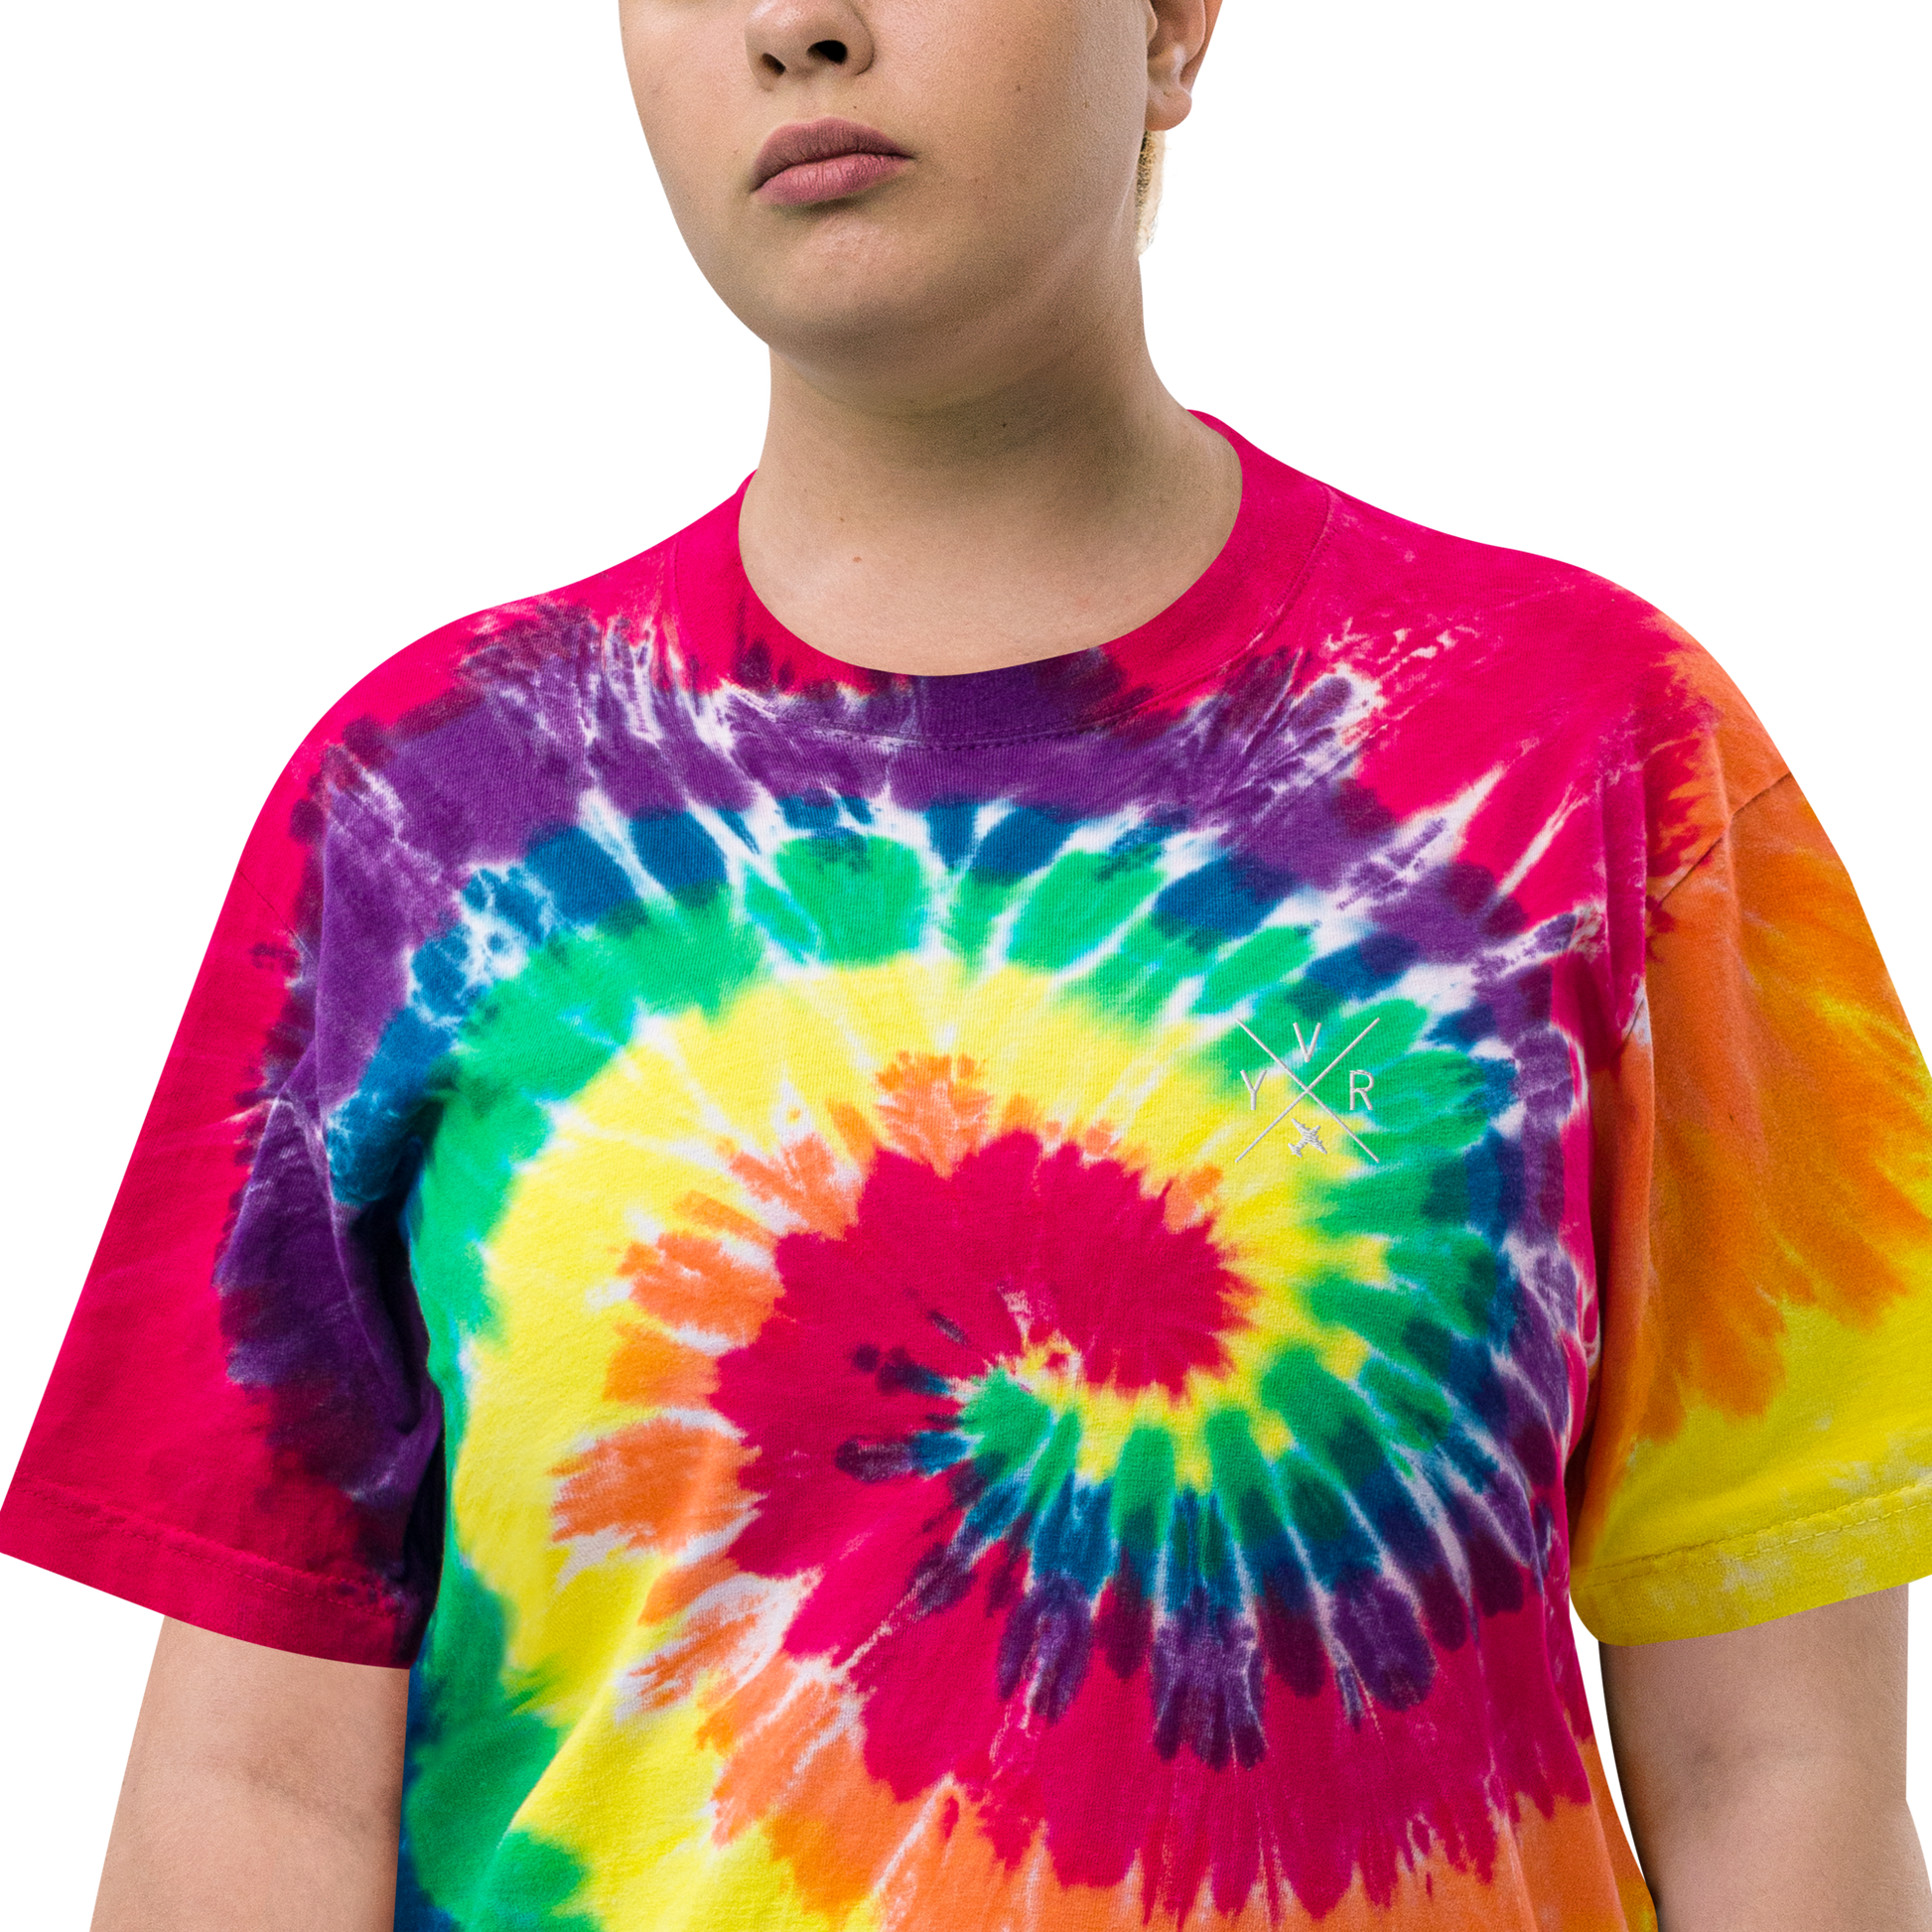 Crossed-X Oversized Tie-Dye T-Shirt • YVR Vancouver • YHM Designs - Image 15